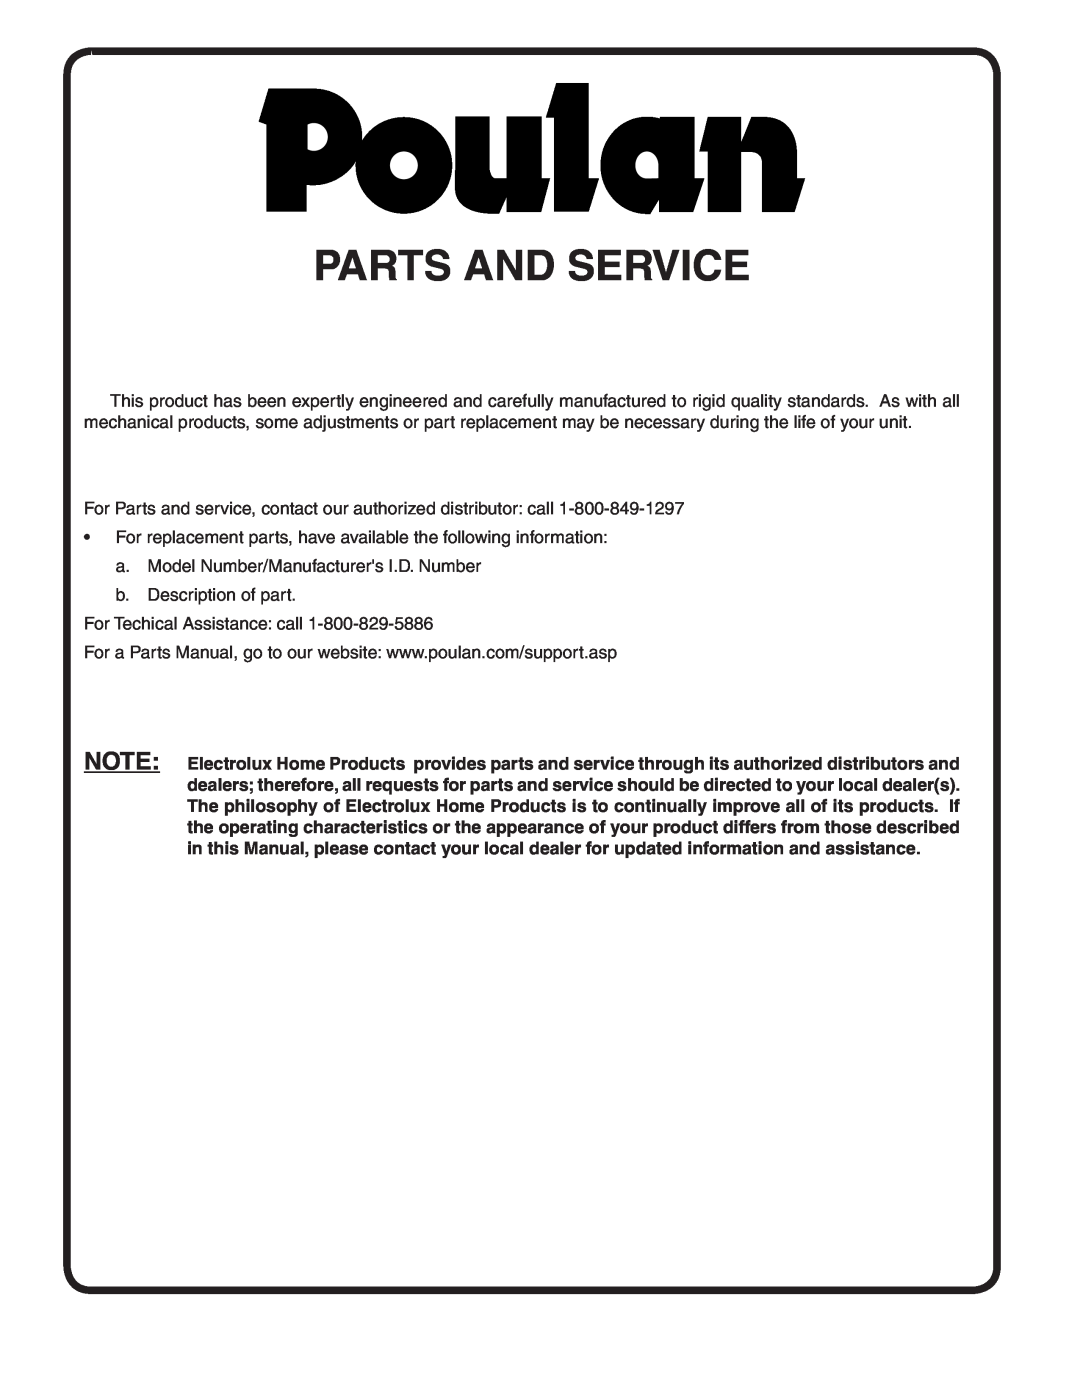 Poulan C20H42YT manual Parts And Service 